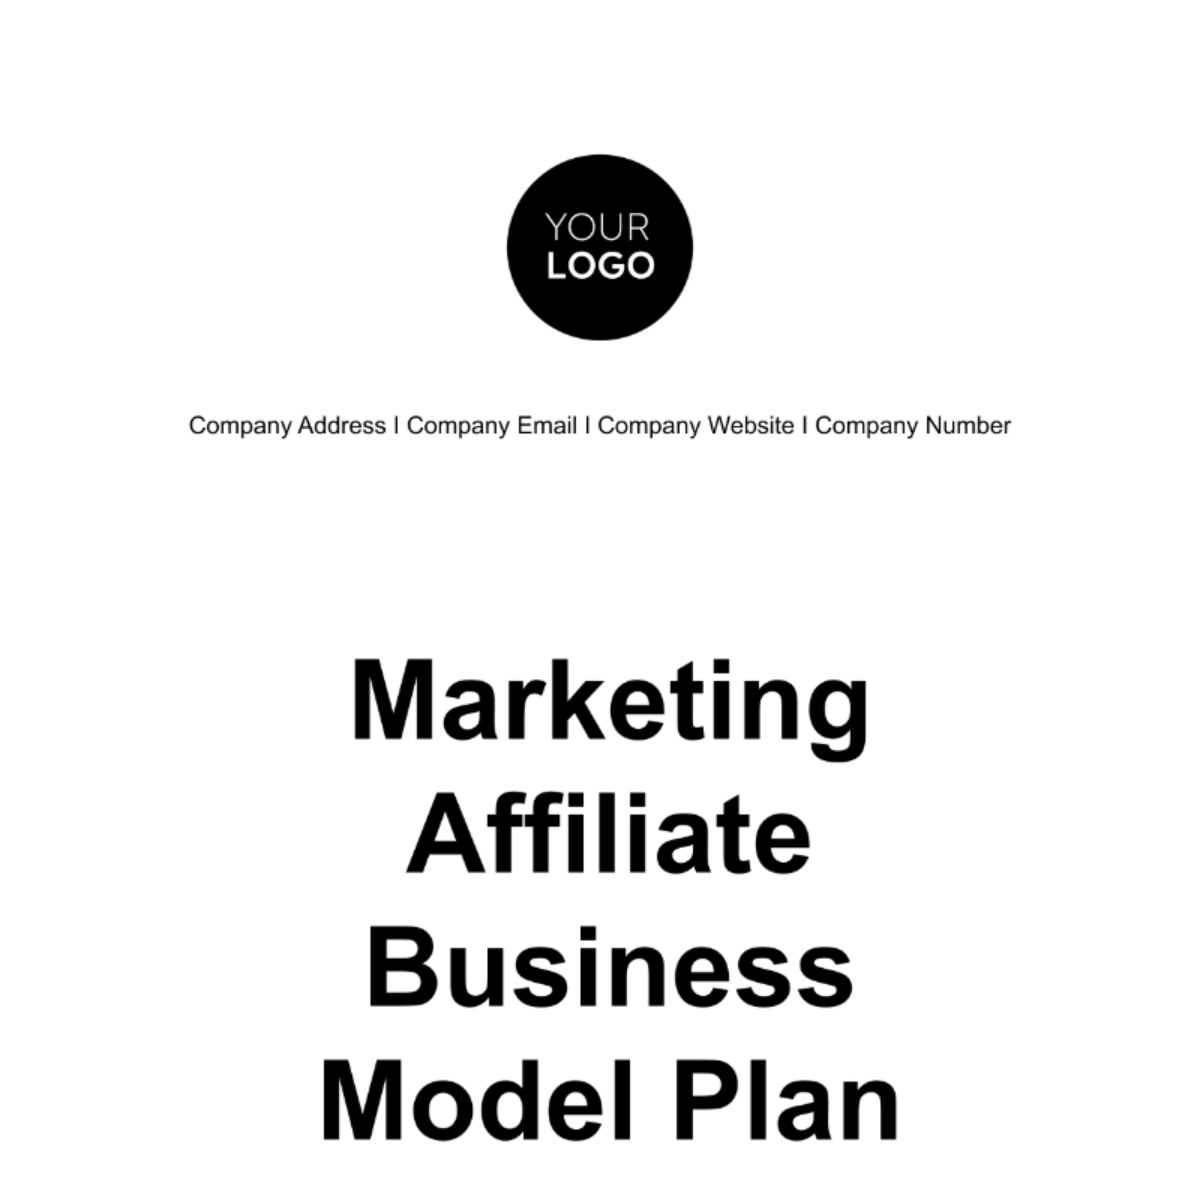 Free Marketing Affiliate Business Model Plan Template